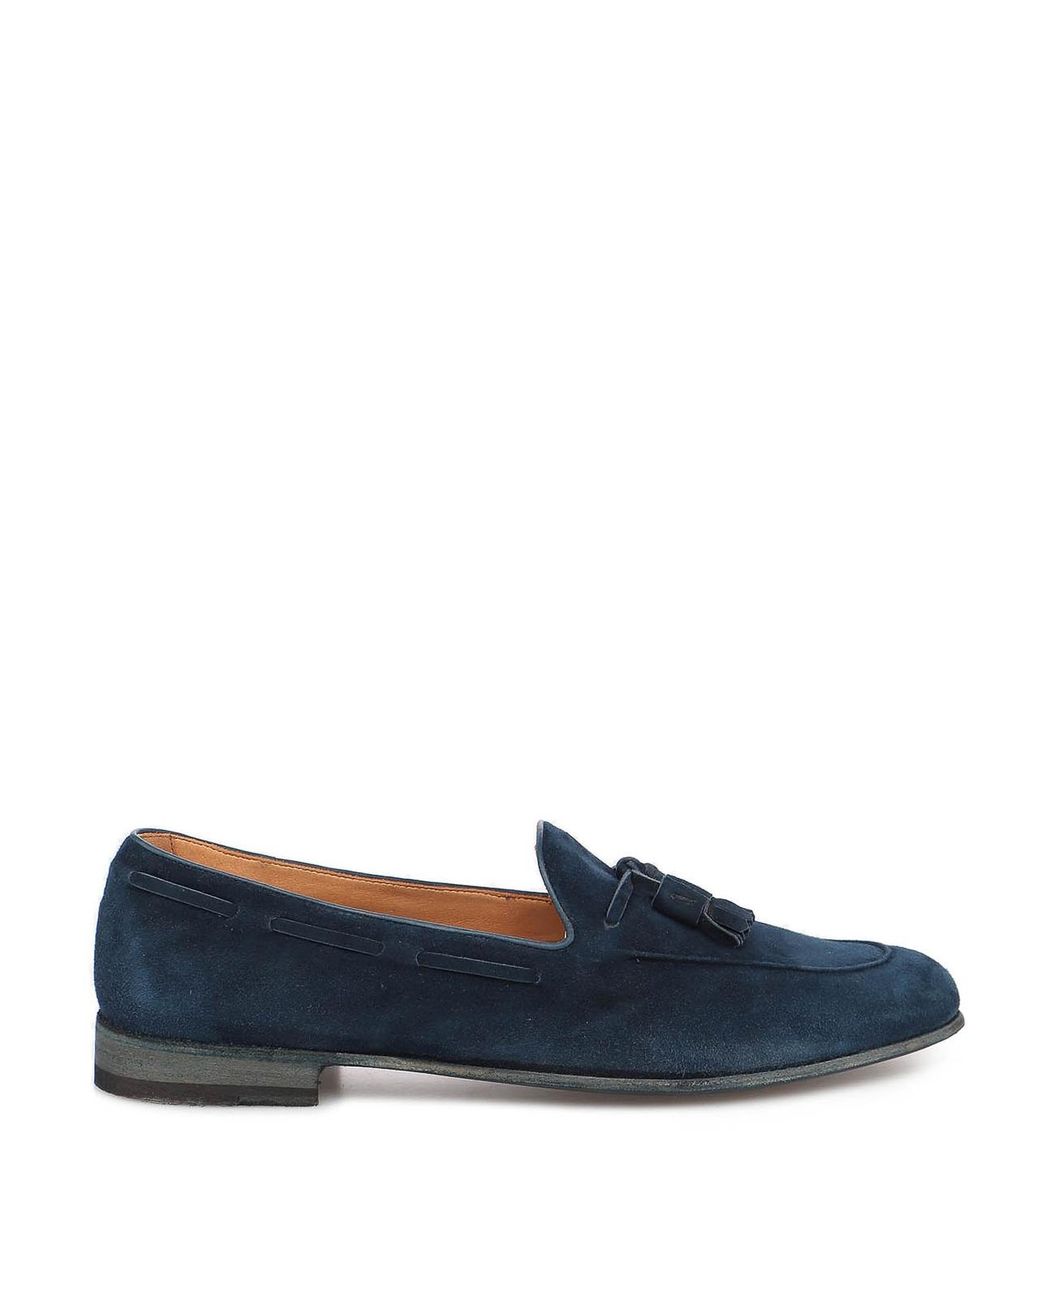 Fratelli Rossetti Kenner Suede Loafers in Blue for Men - Lyst